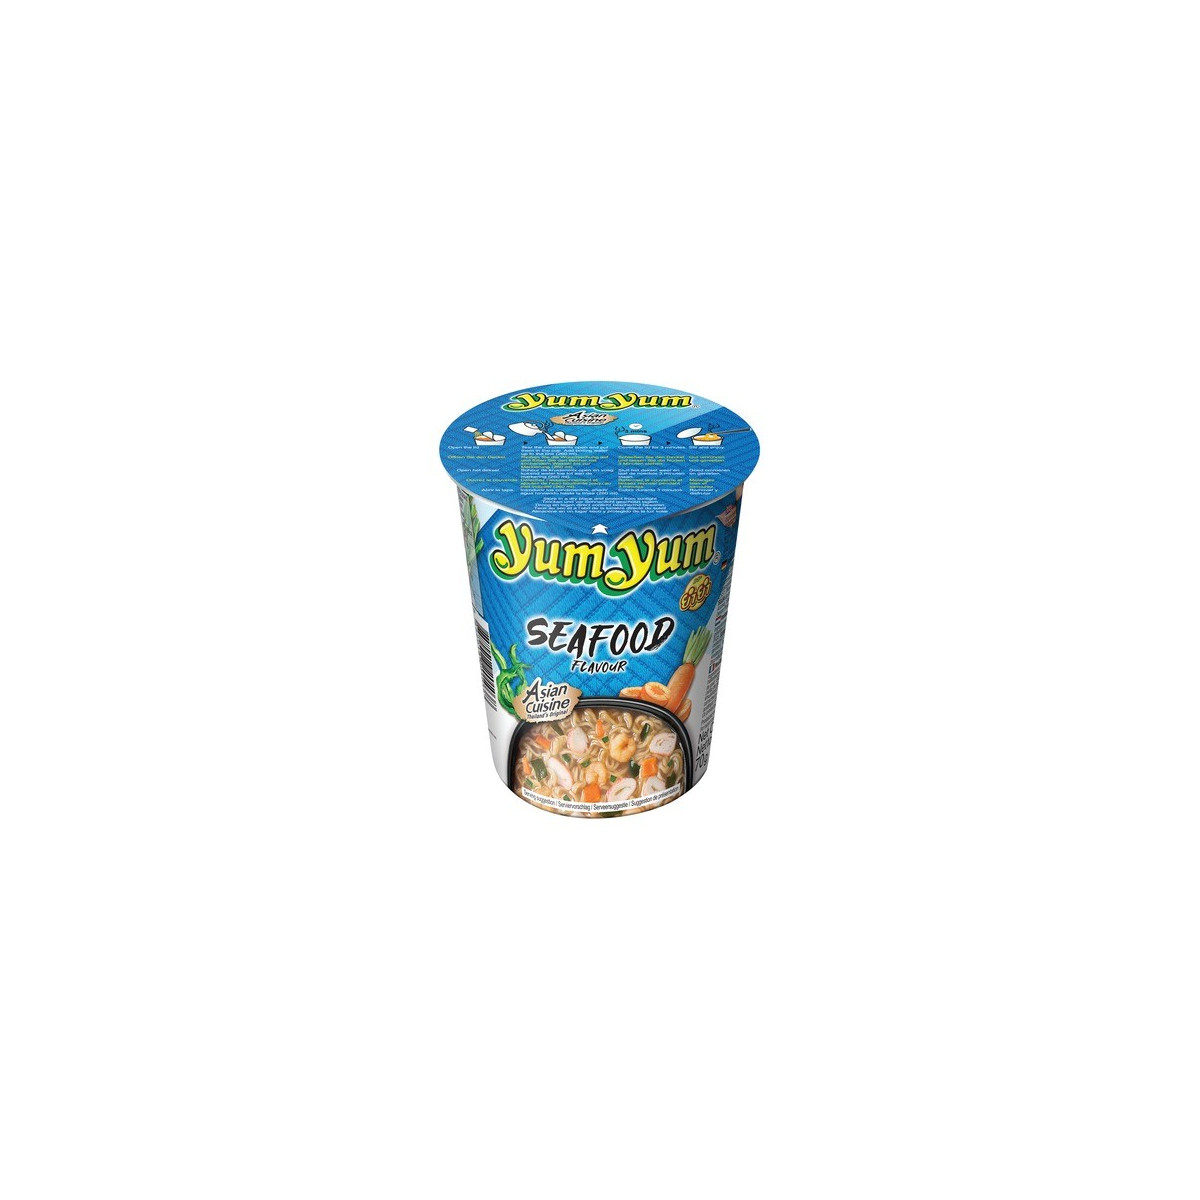 Instant Noodles Spicy Seafood ( CUP) 70g - Yum Yum